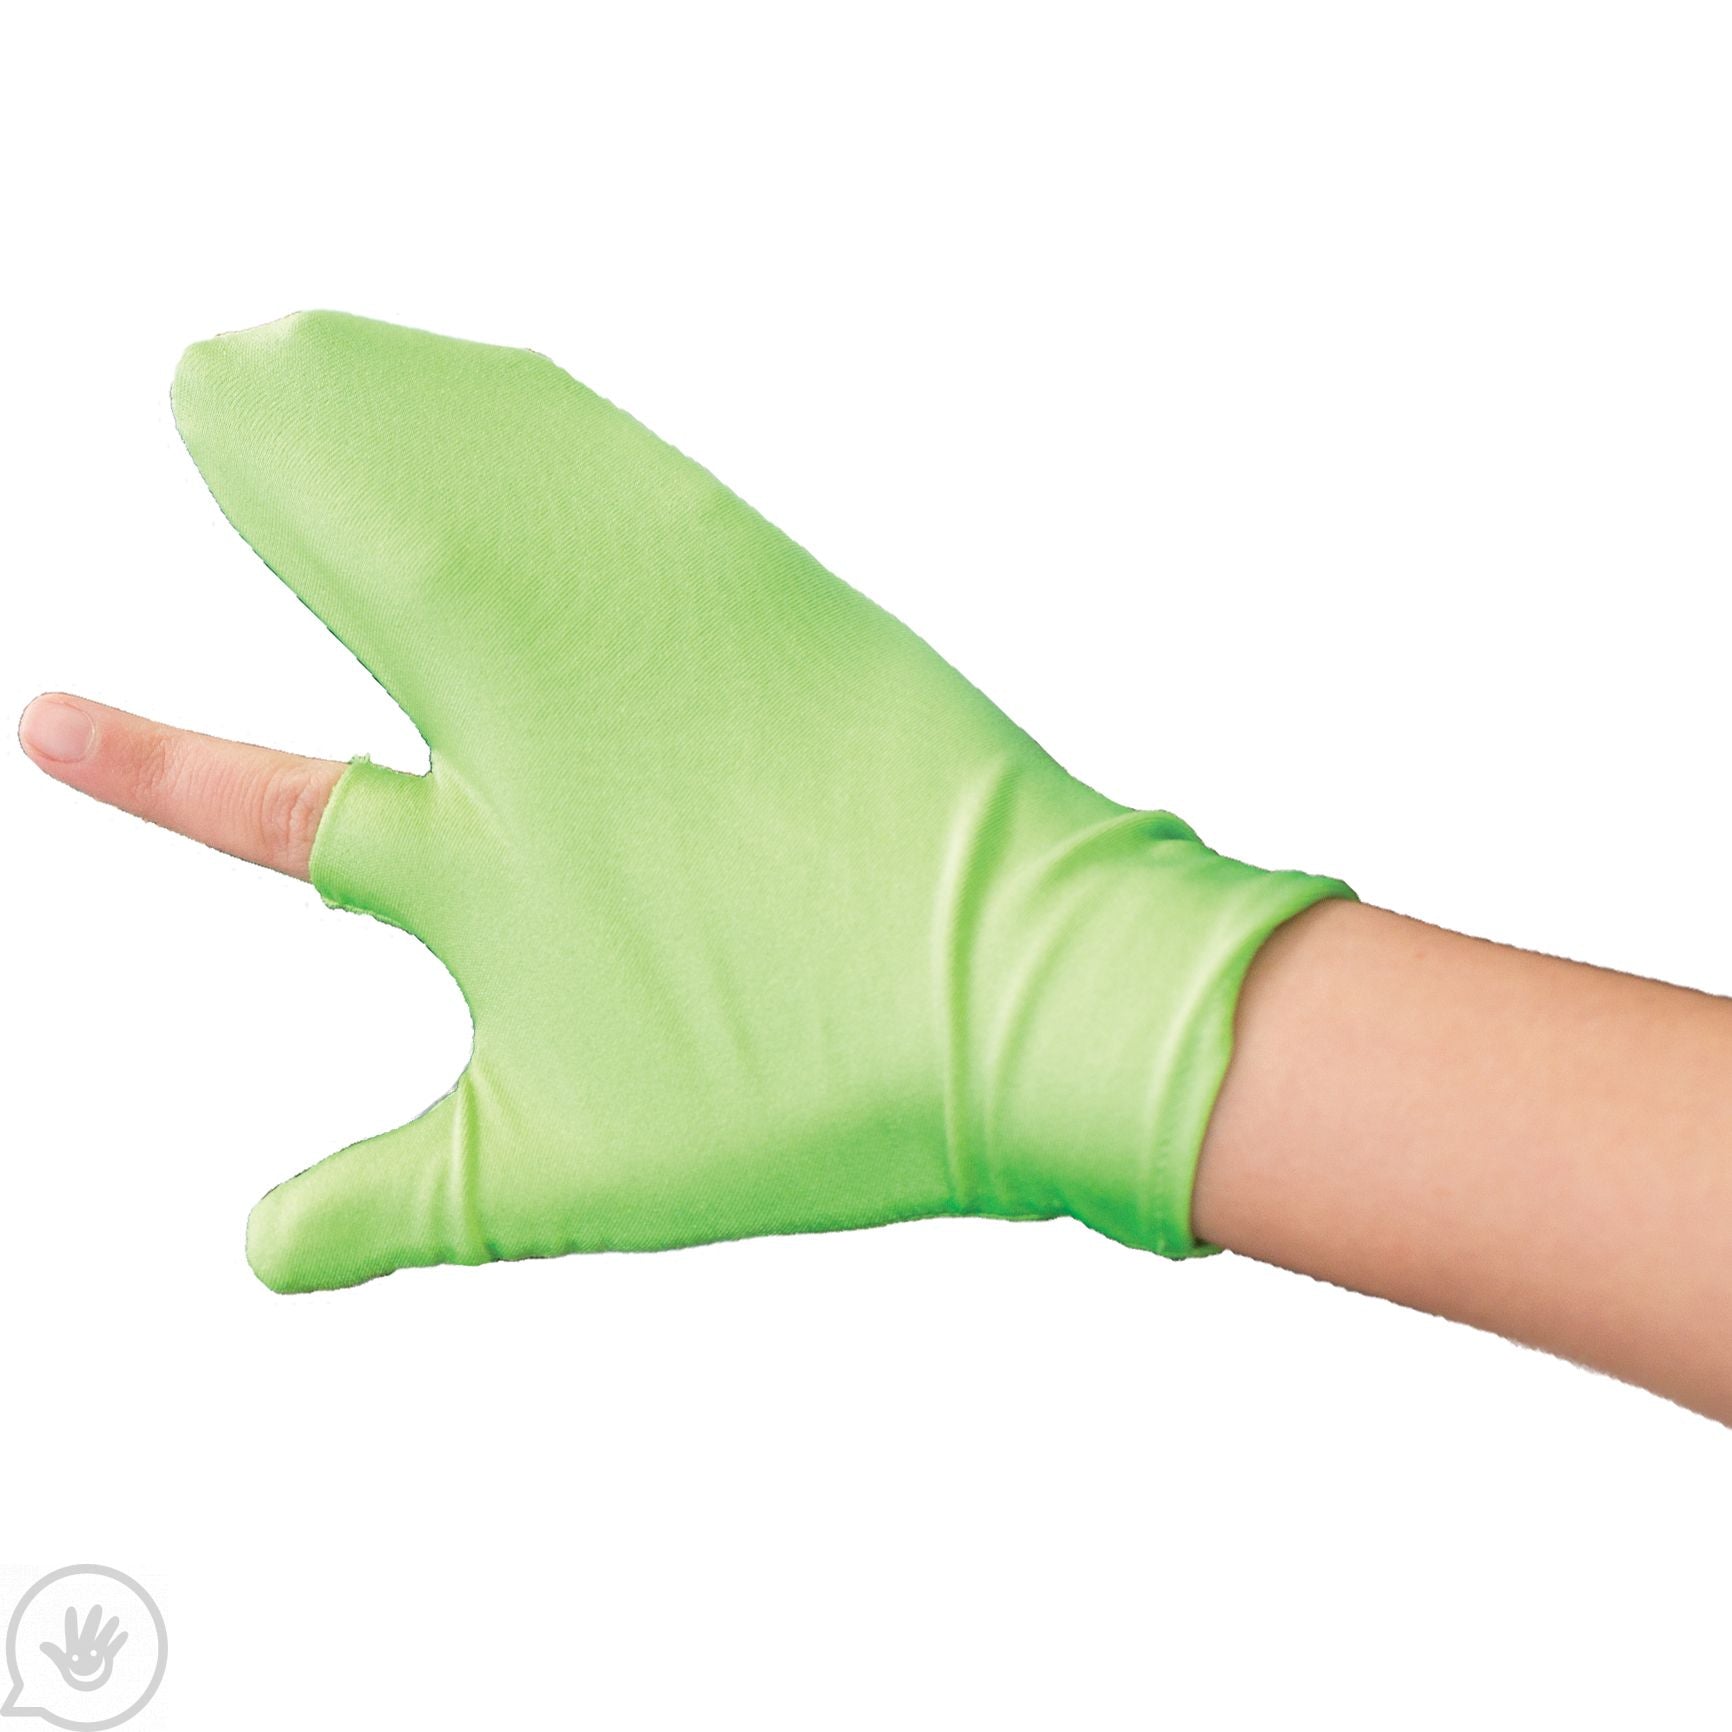 A hand with light skin tone displays the green children's Pointer Finger Isolator.